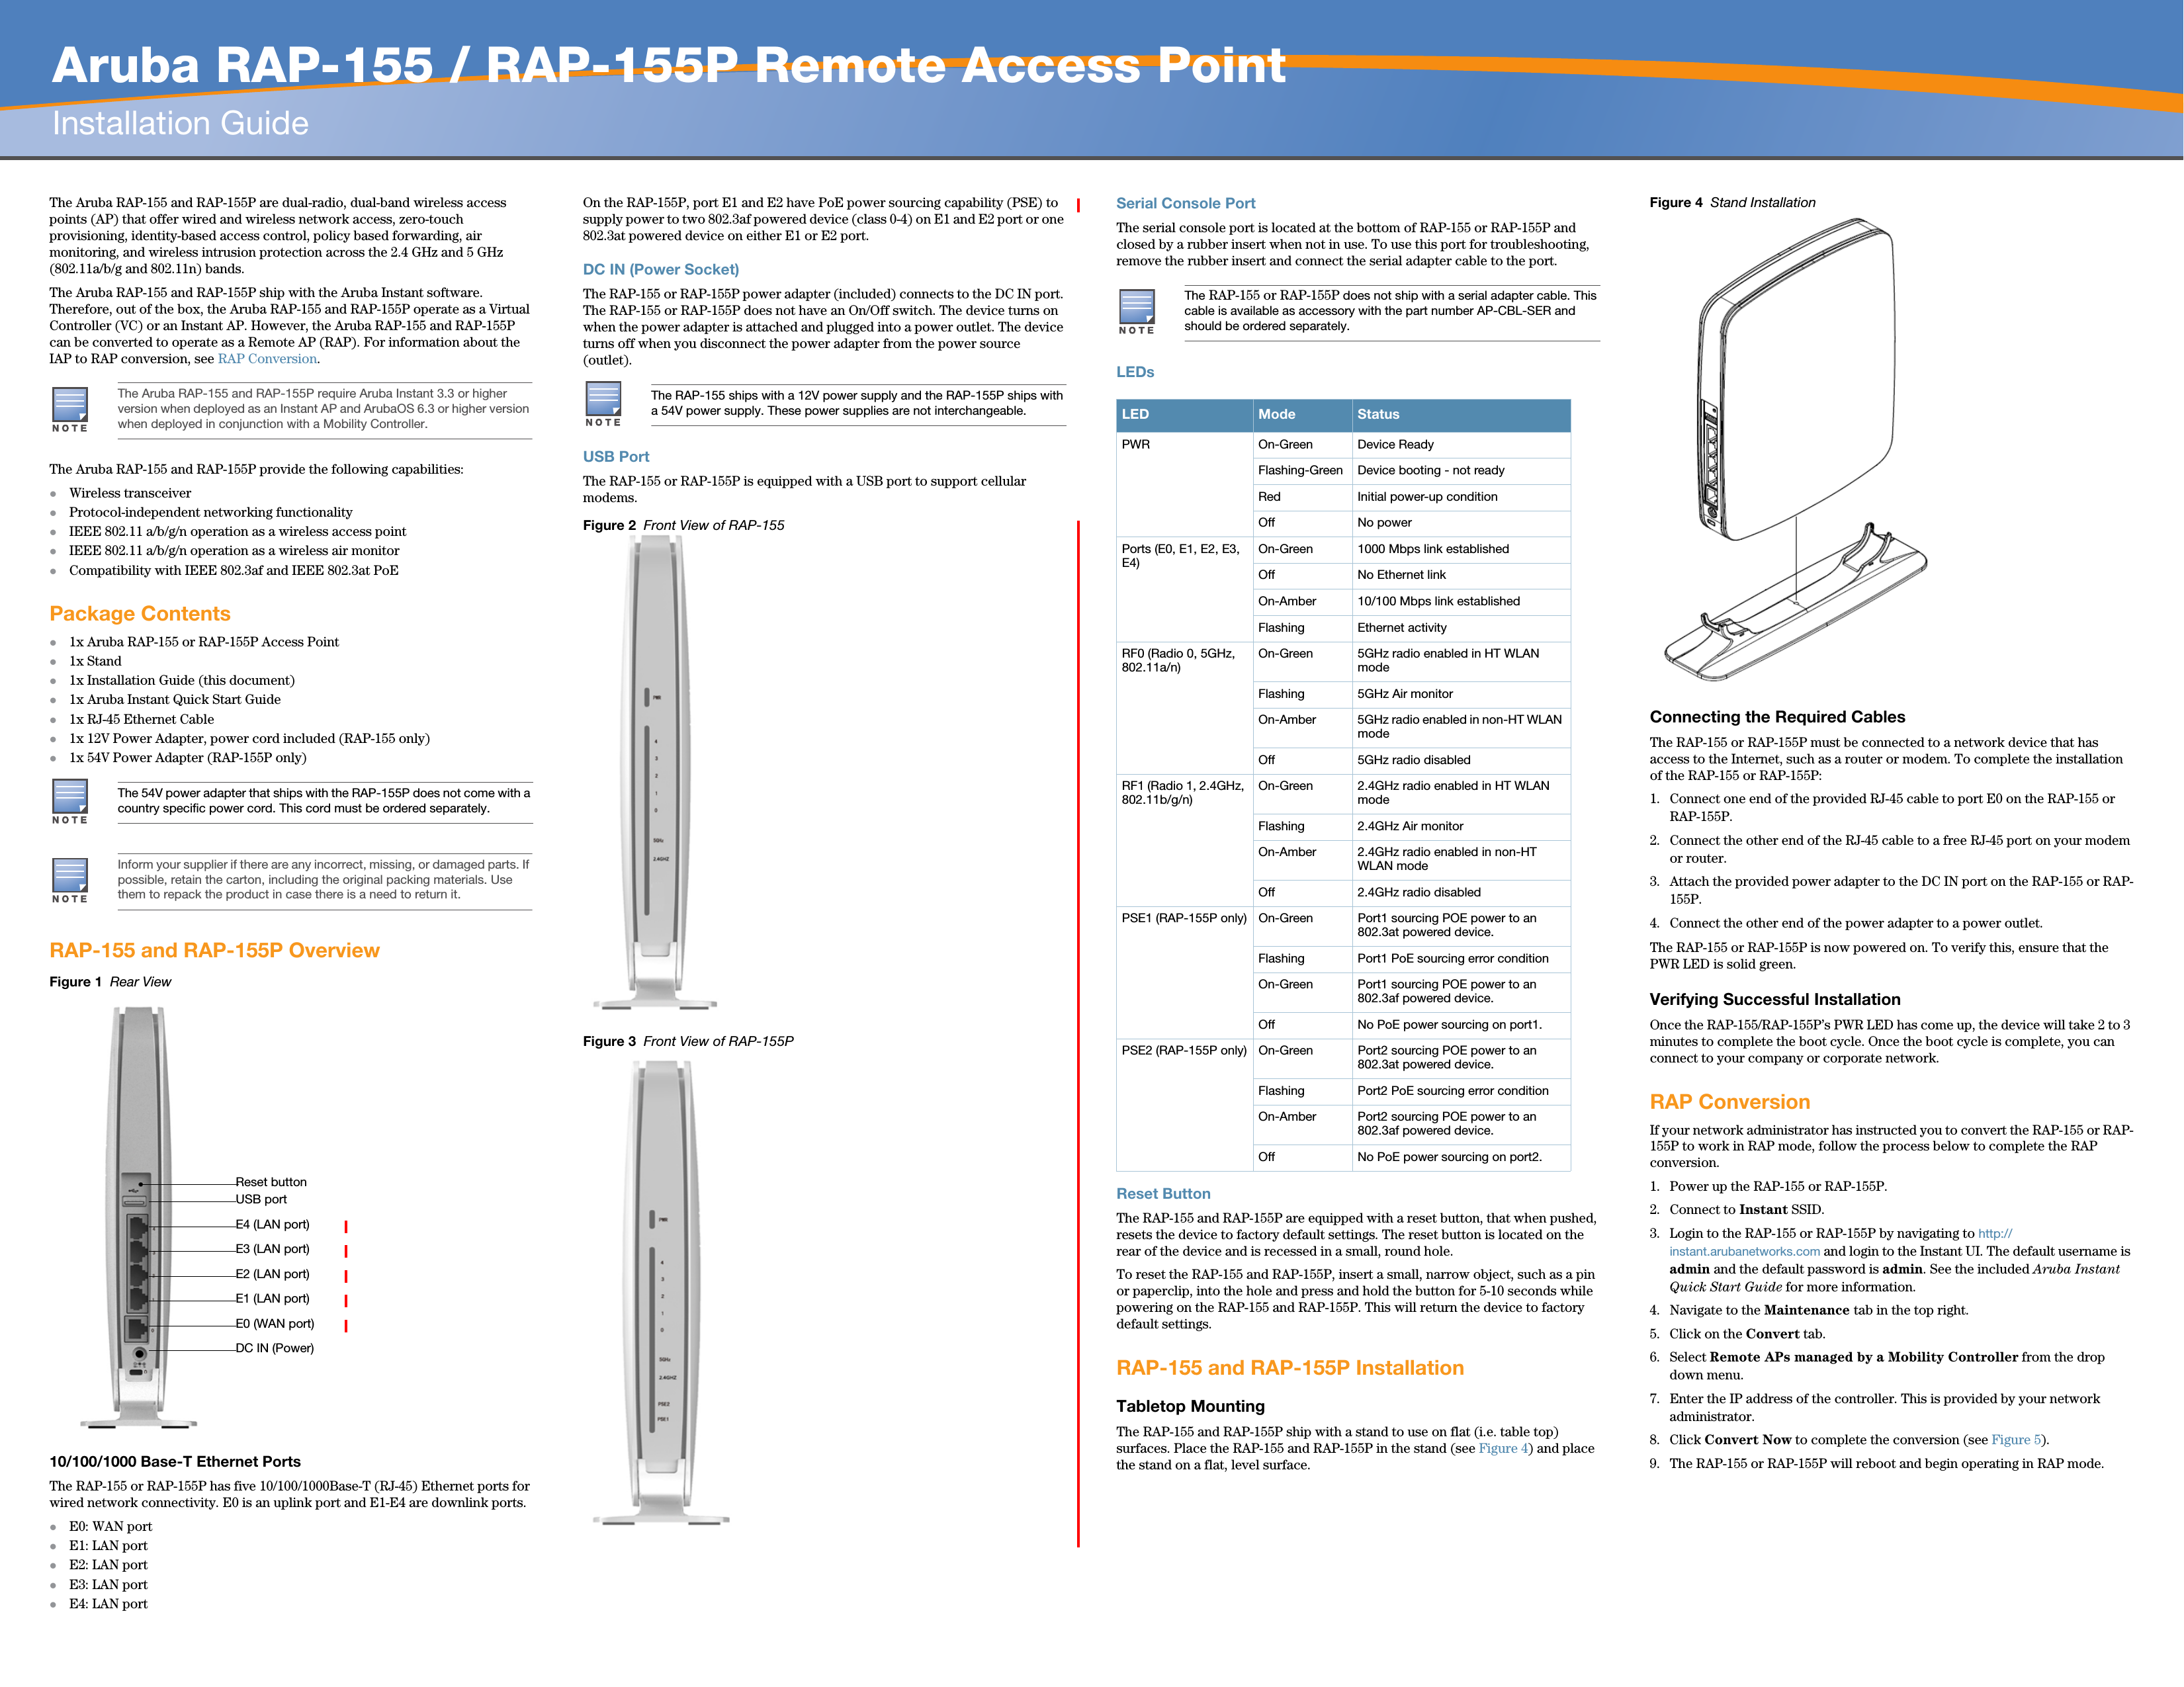   Aruba RAP-155 / RAP-155P Remote Access PointInstallation Guide  The Aruba RAP-155 and RAP-155P are dual-radio, dual-band wireless access points (AP) that offer wired and wireless network access, zero-touch provisioning, identity-based access control, policy based forwarding, air monitoring, and wireless intrusion protection across the 2.4 GHz and 5 GHz (802.11a/b/g and 802.11n) bands.The Aruba RAP-155 and RAP-155P ship with the Aruba Instant software. Therefore, out of the box, the Aruba RAP-155 and RAP-155P operate as a Virtual Controller (VC) or an Instant AP. However, the Aruba RAP-155 and RAP-155P can be converted to operate as a Remote AP (RAP). For information about the IAP to RAP conversion, see RAP Conversion.The Aruba RAP-155 and RAP-155P provide the following capabilities:Wireless transceiverProtocol-independent networking functionalityIEEE 802.11 a/b/g/n operation as a wireless access pointIEEE 802.11 a/b/g/n operation as a wireless air monitorCompatibility with IEEE 802.3af and IEEE 802.3at PoEPackage Contents1x Aruba RAP-155 or RAP-155P Access Point 1x Stand1x Installation Guide (this document)1x Aruba Instant Quick Start Guide1x RJ-45 Ethernet Cable1x 12V Power Adapter, power cord included (RAP-155 only)1x 54V Power Adapter (RAP-155P only)RAP-155 and RAP-155P OverviewFigure 1  Rear View10/100/1000 Base-T Ethernet PortsThe RAP-155 or RAP-155P has five 10/100/1000Base-T (RJ-45) Ethernet ports for wired network connectivity. E0 is an uplink port and E1-E4 are downlink ports.E0: WAN portE1: LAN portE2: LAN portE3: LAN portE4: LAN port On the RAP-155P, port E1 and E2 have PoE power sourcing capability (PSE) to supply power to two 802.3af powered device (class 0-4) on E1 and E2 port or one 802.3at powered device on either E1 or E2 port.DC IN (Power Socket)The RAP-155 or RAP-155P power adapter (included) connects to the DC IN port. The RAP-155 or RAP-155P does not have an On/Off switch. The device turns on when the power adapter is attached and plugged into a power outlet. The device turns off when you disconnect the power adapter from the power source (outlet).USB PortThe RAP-155 or RAP-155P is equipped with a USB port to support cellular modems.Figure 2  Front View of RAP-155Figure 3  Front View of RAP-155PSerial Console PortThe serial console port is located at the bottom of RAP-155 or RAP-155P and closed by a rubber insert when not in use. To use this port for troubleshooting, remove the rubber insert and connect the serial adapter cable to the port.LEDs Reset ButtonThe RAP-155 and RAP-155P are equipped with a reset button, that when pushed, resets the device to factory default settings. The reset button is located on the rear of the device and is recessed in a small, round hole.To reset the RAP-155 and RAP-155P, insert a small, narrow object, such as a pin or paperclip, into the hole and press and hold the button for 5-10 seconds while powering on the RAP-155 and RAP-155P. This will return the device to factory default settings.RAP-155 and RAP-155P InstallationTabletop MountingThe RAP-155 and RAP-155P ship with a stand to use on flat (i.e. table top) surfaces. Place the RAP-155 and RAP-155P in the stand (see Figure 4) and place the stand on a flat, level surface.Figure 4  Stand Installation Connecting the Required CablesThe RAP-155 or RAP-155P must be connected to a network device that has access to the Internet, such as a router or modem. To complete the installation of the RAP-155 or RAP-155P:1. Connect one end of the provided RJ-45 cable to port E0 on the RAP-155 or RAP-155P.2. Connect the other end of the RJ-45 cable to a free RJ-45 port on your modem or router. 3. Attach the provided power adapter to the DC IN port on the RAP-155 or RAP-155P.4. Connect the other end of the power adapter to a power outlet.The RAP-155 or RAP-155P is now powered on. To verify this, ensure that the PWR LED is solid green. Verifying Successful InstallationOnce the RAP-155/RAP-155P’s PWR LED has come up, the device will take 2 to 3 minutes to complete the boot cycle. Once the boot cycle is complete, you can connect to your company or corporate network.RAP ConversionIf your network administrator has instructed you to convert the RAP-155 or RAP-155P to work in RAP mode, follow the process below to complete the RAP conversion. 1. Power up the RAP-155 or RAP-155P.2. Connect to Instant SSID.3. Login to the RAP-155 or RAP-155P by navigating to http://instant.arubanetworks.com and login to the Instant UI. The default username is admin and the default password is admin. See the included Aruba Instant Quick Start Guide for more information.4. Navigate to the Maintenance tab in the top right.5. Click on the Convert tab.6. Select Remote APs managed by a Mobility Controller from the drop down menu.7. Enter the IP address of the controller. This is provided by your network administrator.8. Click Convert Now to complete the conversion (see Figure 5).9. The RAP-155 or RAP-155P will reboot and begin operating in RAP mode.The Aruba RAP-155 and RAP-155P require Aruba Instant 3.3 or higher version when deployed as an Instant AP and ArubaOS 6.3 or higher version when deployed in conjunction with a Mobility Controller.The 54V power adapter that ships with the RAP-155P does not come with a country specific power cord. This cord must be ordered separately.Inform your supplier if there are any incorrect, missing, or damaged parts. If possible, retain the carton, including the original packing materials. Use them to repack the product in case there is a need to return it.Reset buttonUSB portE4 (LAN port)E3 (LAN port)E2 (LAN port)E1 (LAN port)E0 (WAN port)DC IN (Power)The RAP-155 ships with a 12V power supply and the RAP-155P ships with a 54V power supply. These power supplies are not interchangeable.The RAP-155 or RAP-155P does not ship with a serial adapter cable. This cable is available as accessory with the part number AP-CBL-SER and should be ordered separately.LED Mode StatusPWR On-Green Device ReadyFlashing-Green Device booting - not readyRed Initial power-up conditionOff No powerPorts (E0, E1, E2, E3, E4)On-Green 1000 Mbps link establishedOff No Ethernet linkOn-Amber 10/100 Mbps link establishedFlashing Ethernet activityRF0 (Radio 0, 5GHz, 802.11a/n)On-Green 5GHz radio enabled in HT WLAN modeFlashing 5GHz Air monitorOn-Amber 5GHz radio enabled in non-HT WLAN modeOff 5GHz radio disabledRF1 (Radio 1, 2.4GHz, 802.11b/g/n)On-Green 2.4GHz radio enabled in HT WLAN modeFlashing 2.4GHz Air monitorOn-Amber 2.4GHz radio enabled in non-HT WLAN modeOff 2.4GHz radio disabledPSE1 (RAP-155P only) On-Green Port1 sourcing POE power to an 802.3at powered device.Flashing Port1 PoE sourcing error conditionOn-Green Port1 sourcing POE power to an 802.3af powered device.Off No PoE power sourcing on port1.PSE2 (RAP-155P only) On-Green Port2 sourcing POE power to an 802.3at powered device.Flashing Port2 PoE sourcing error conditionOn-Amber Port2 sourcing POE power to an 802.3af powered device.Off No PoE power sourcing on port2.